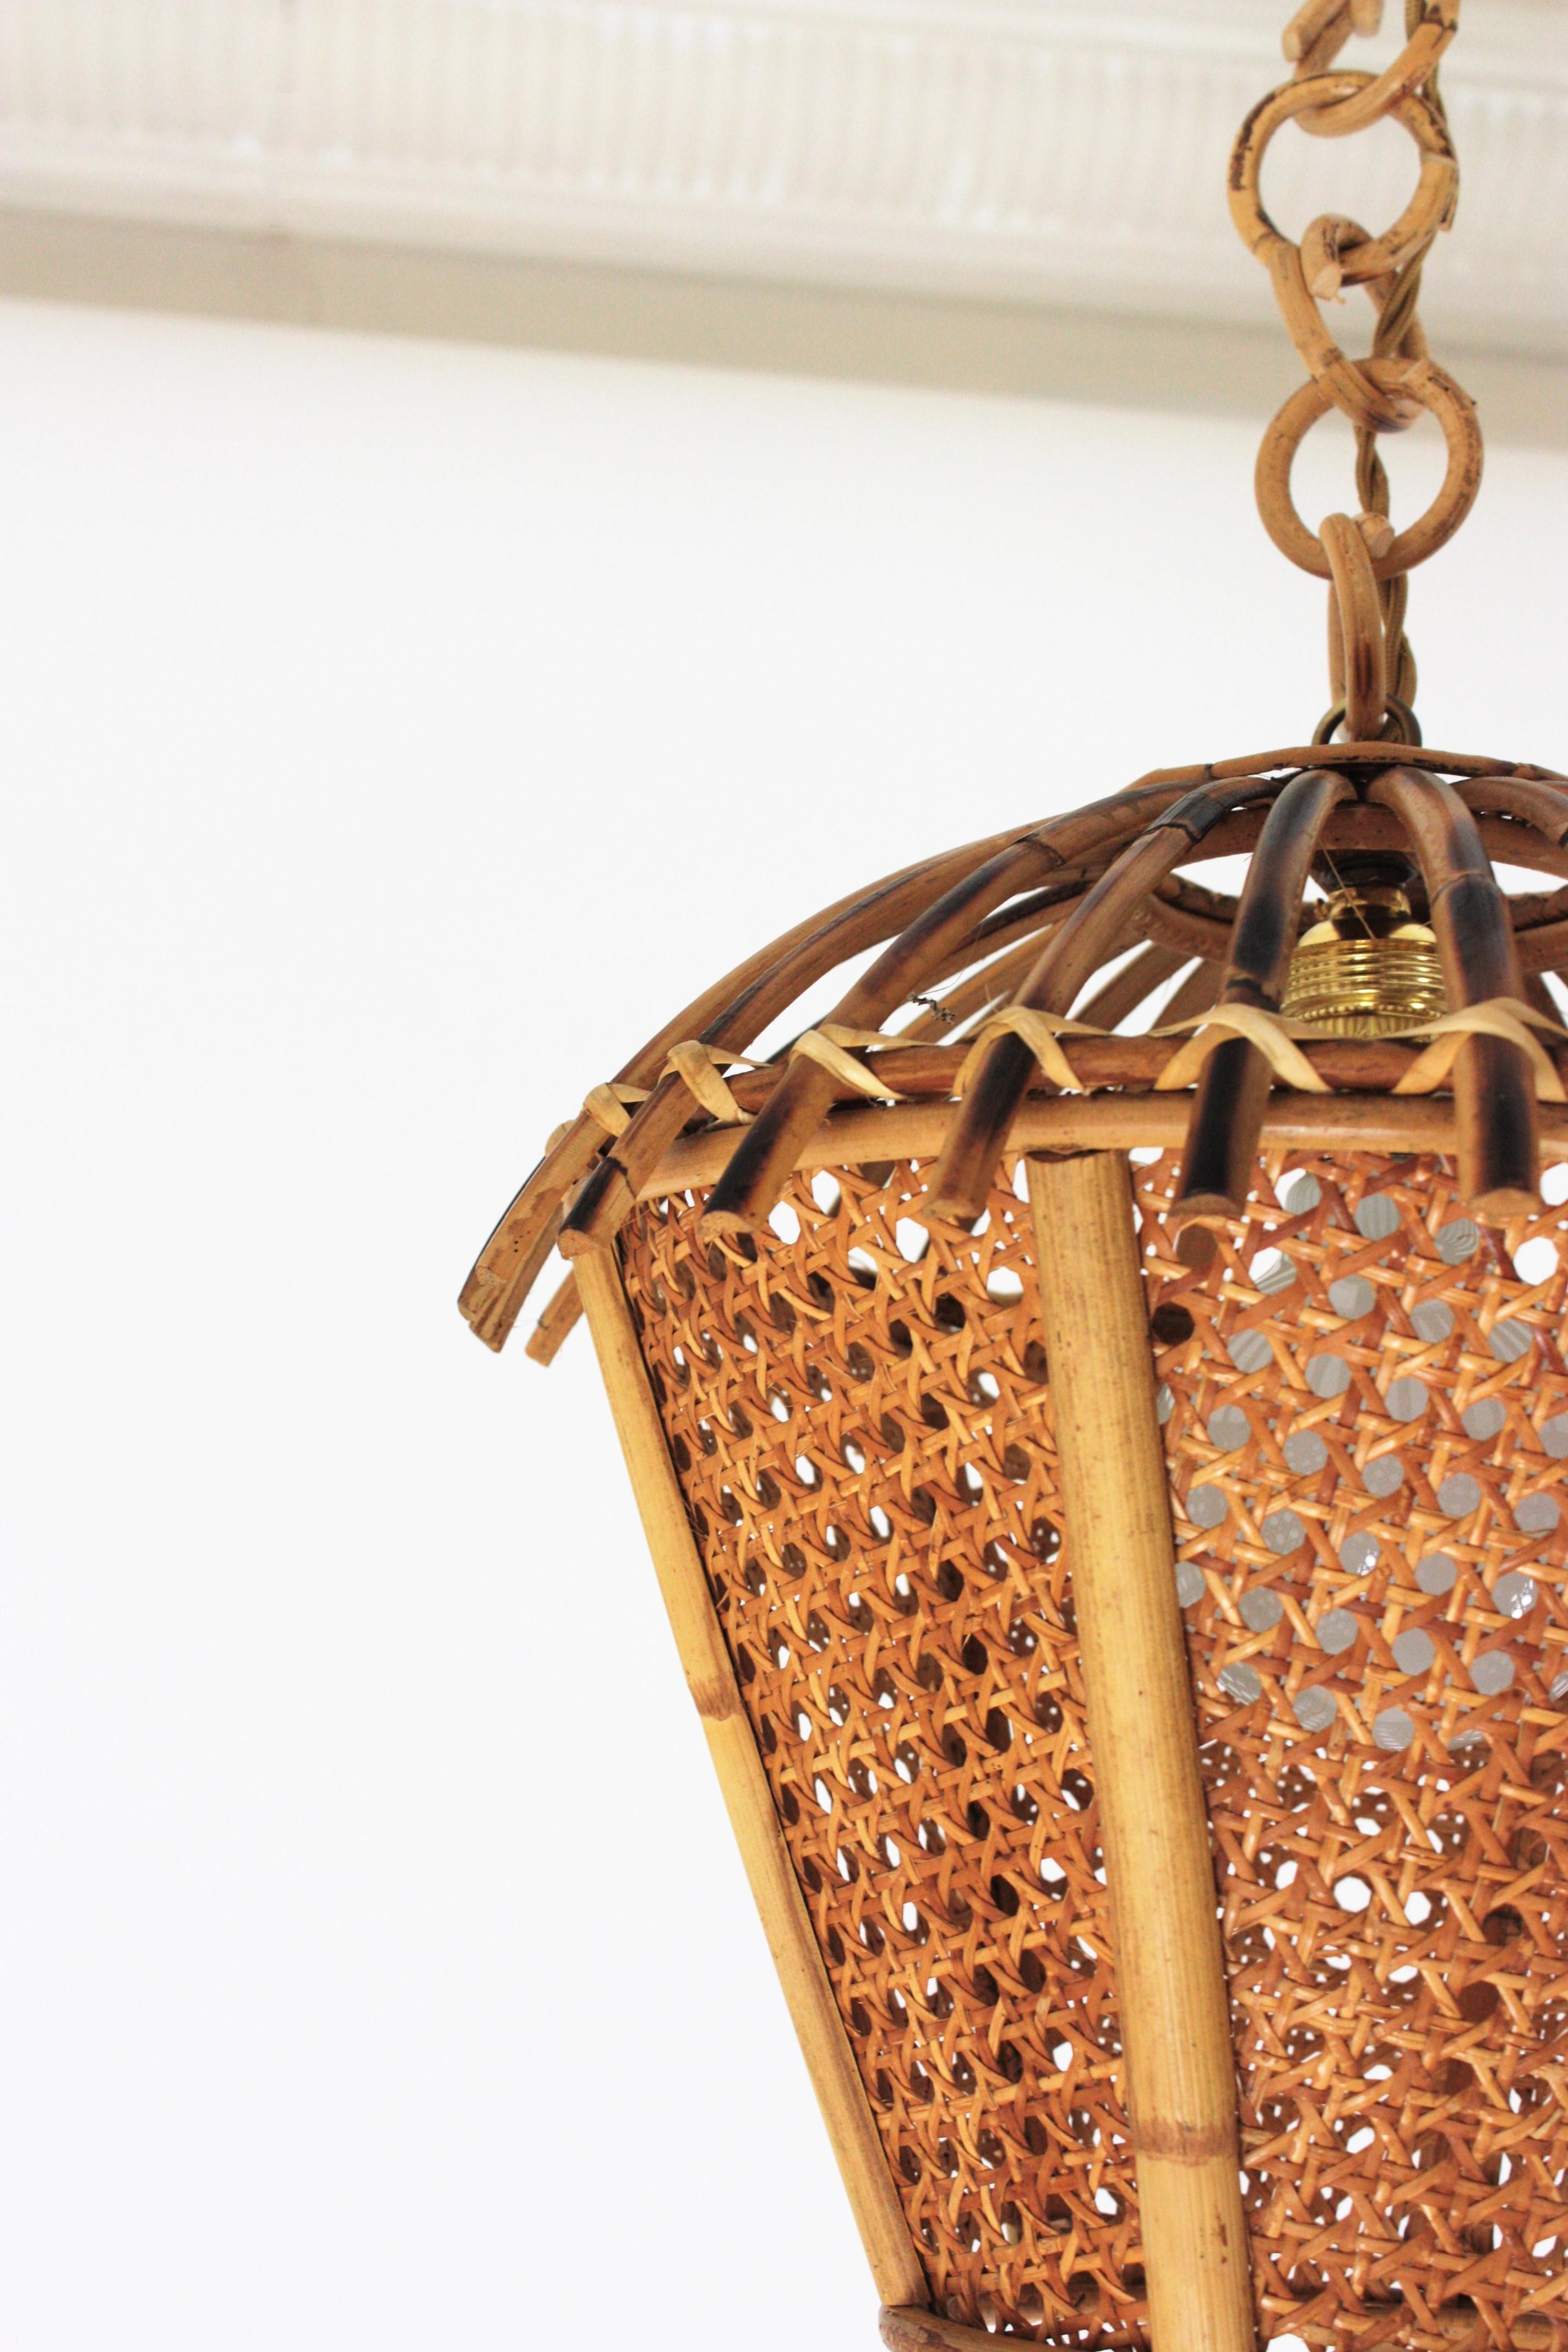 Italian Modernist Rattan and Wicker Wire Pagoda Pendant Hanging Light, 1960s For Sale 7